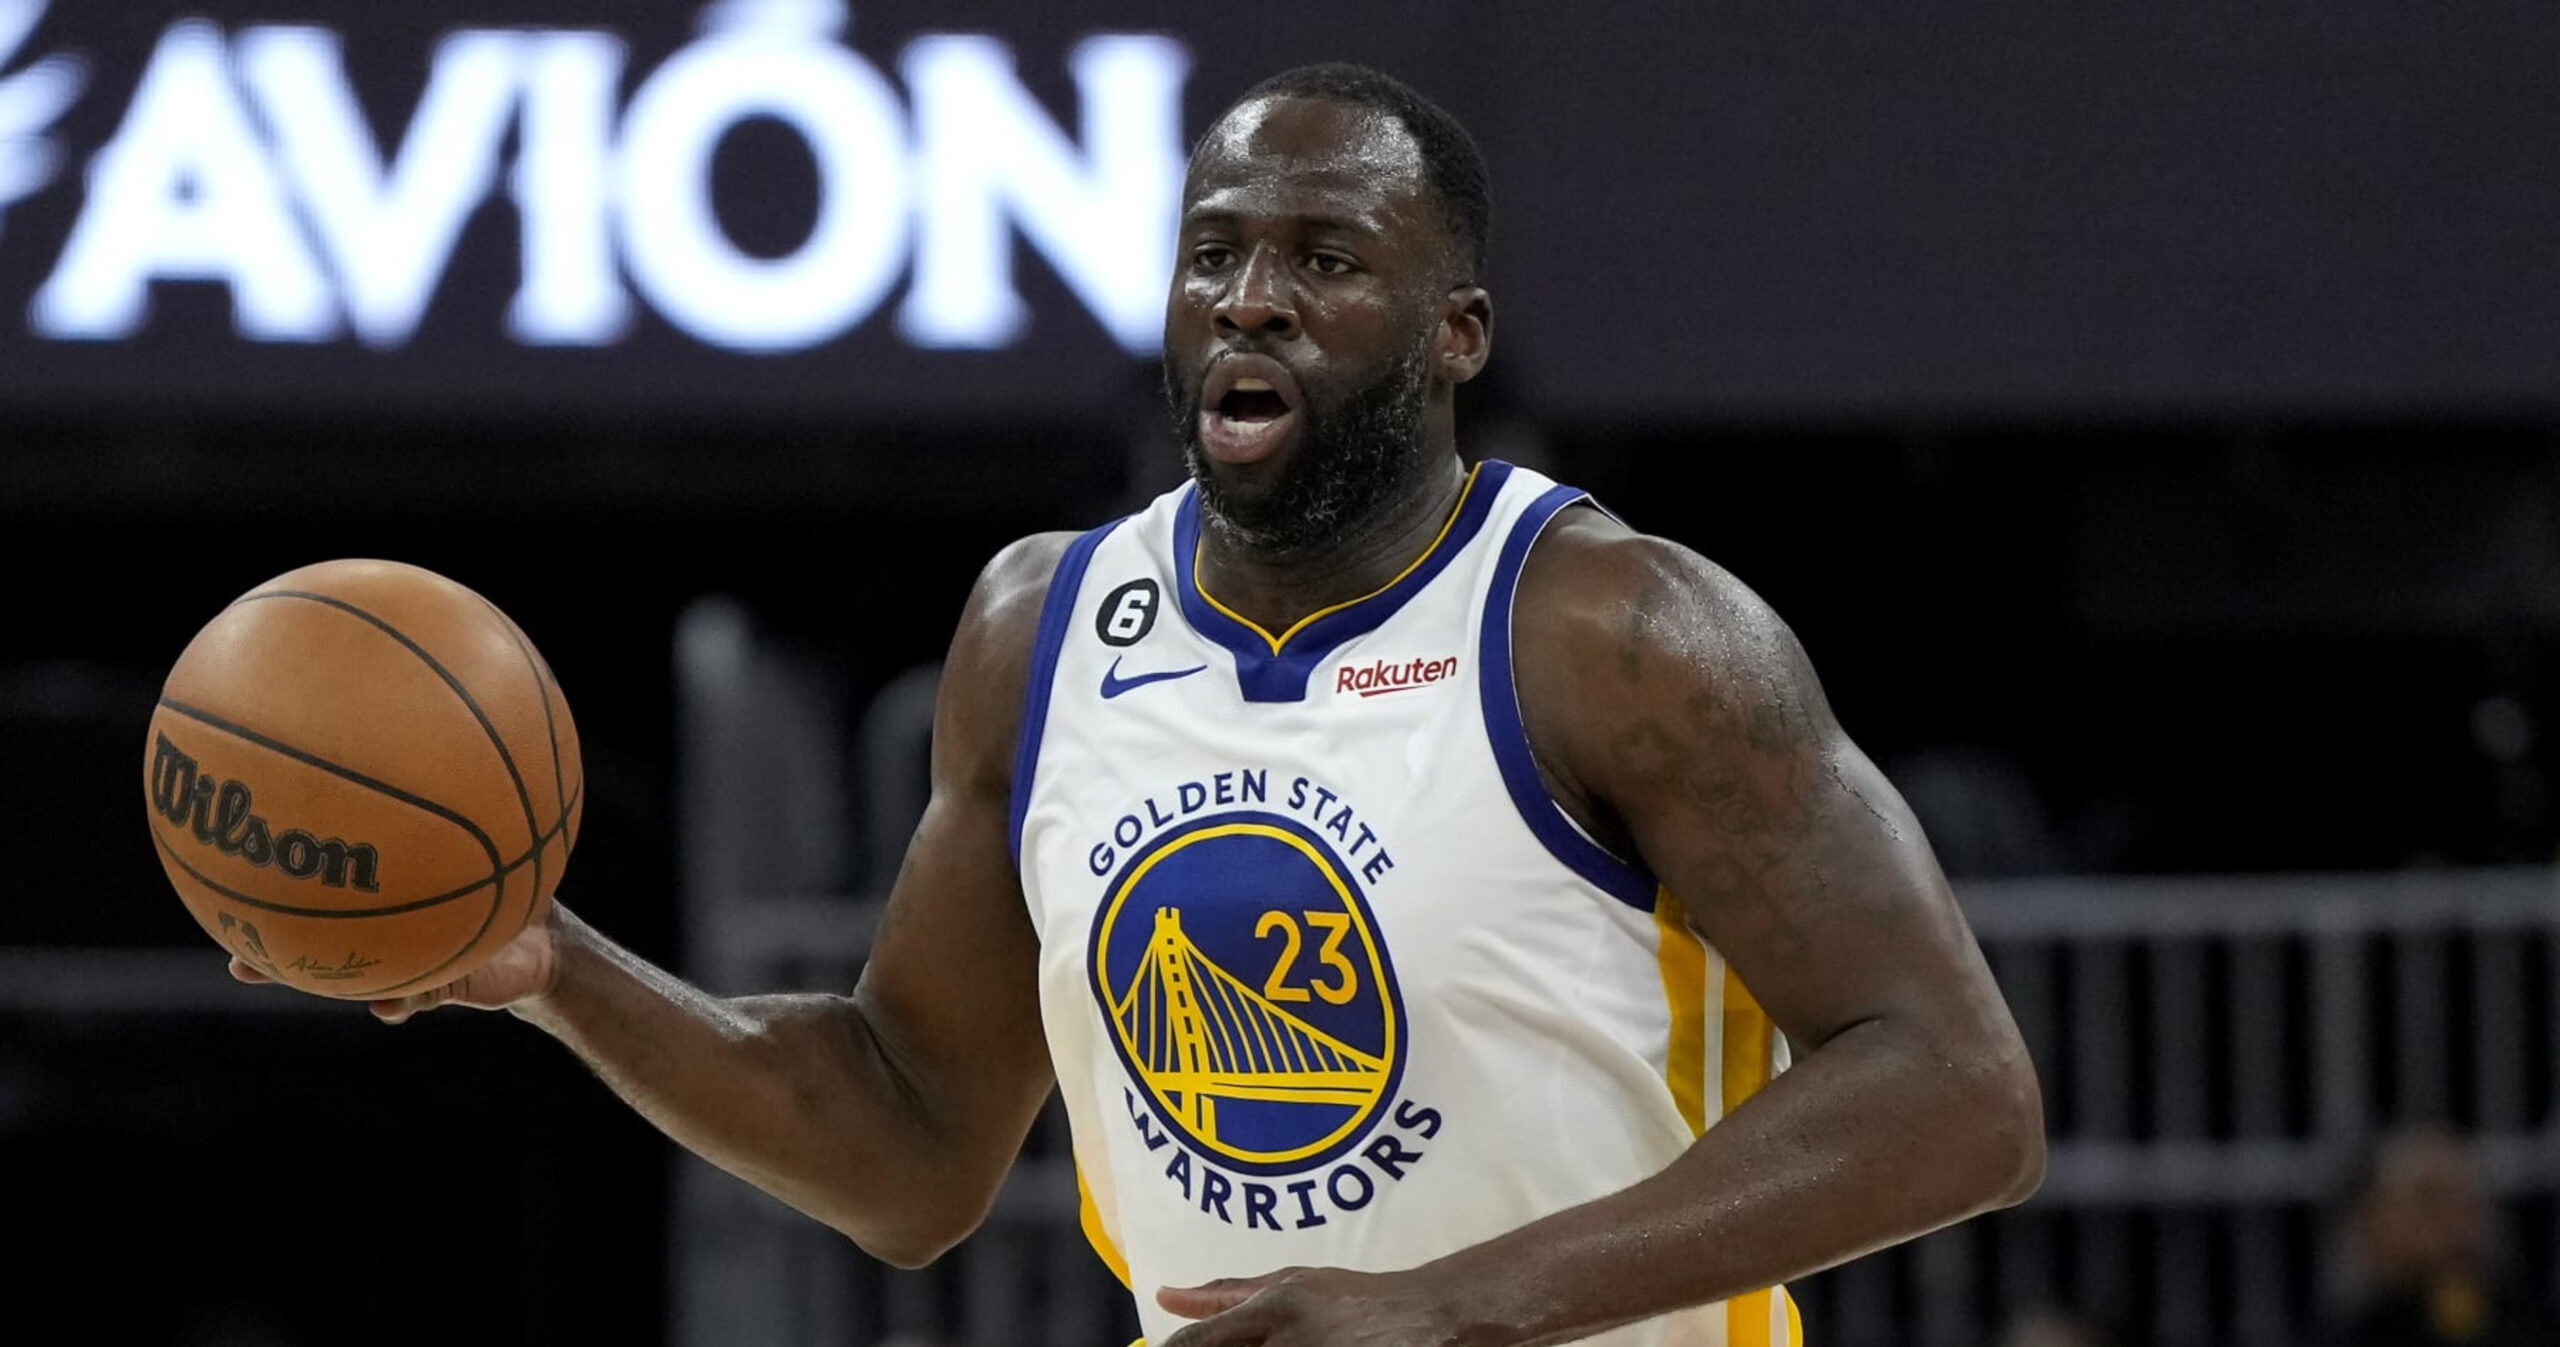 Draymond Green, Draymond Green San Antonio Spurs Trade Deal is Imminent, Here’s Why